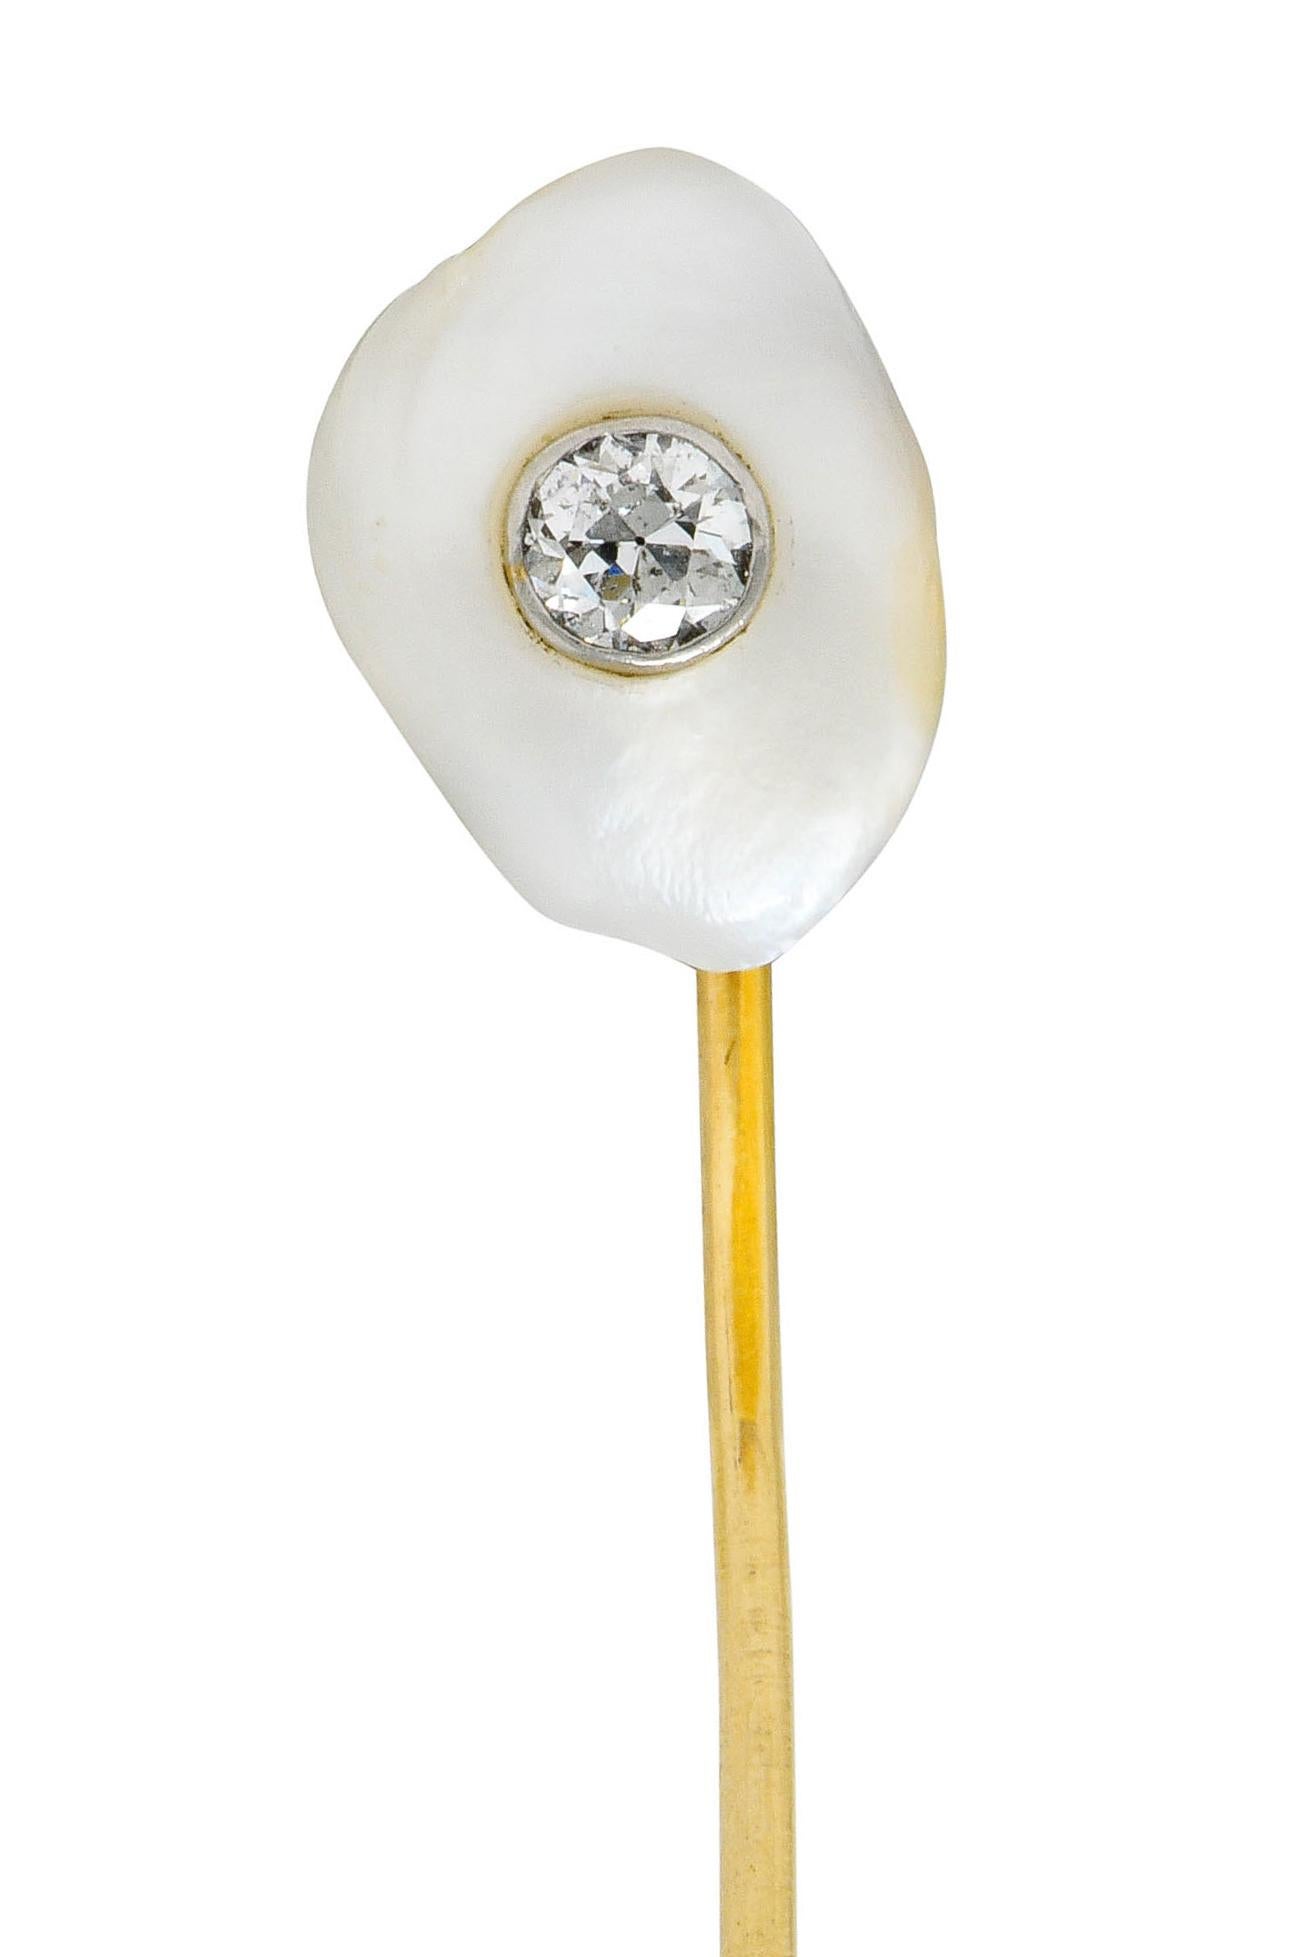 Featuring an amorphous baroque pearl with strong white body color, a slightly silver overtone, and an excellent luster

Inset with a transitional diamond, bezel set in platinum, weighing approximately 0.20 carat; eye-clean and white

Completed by an